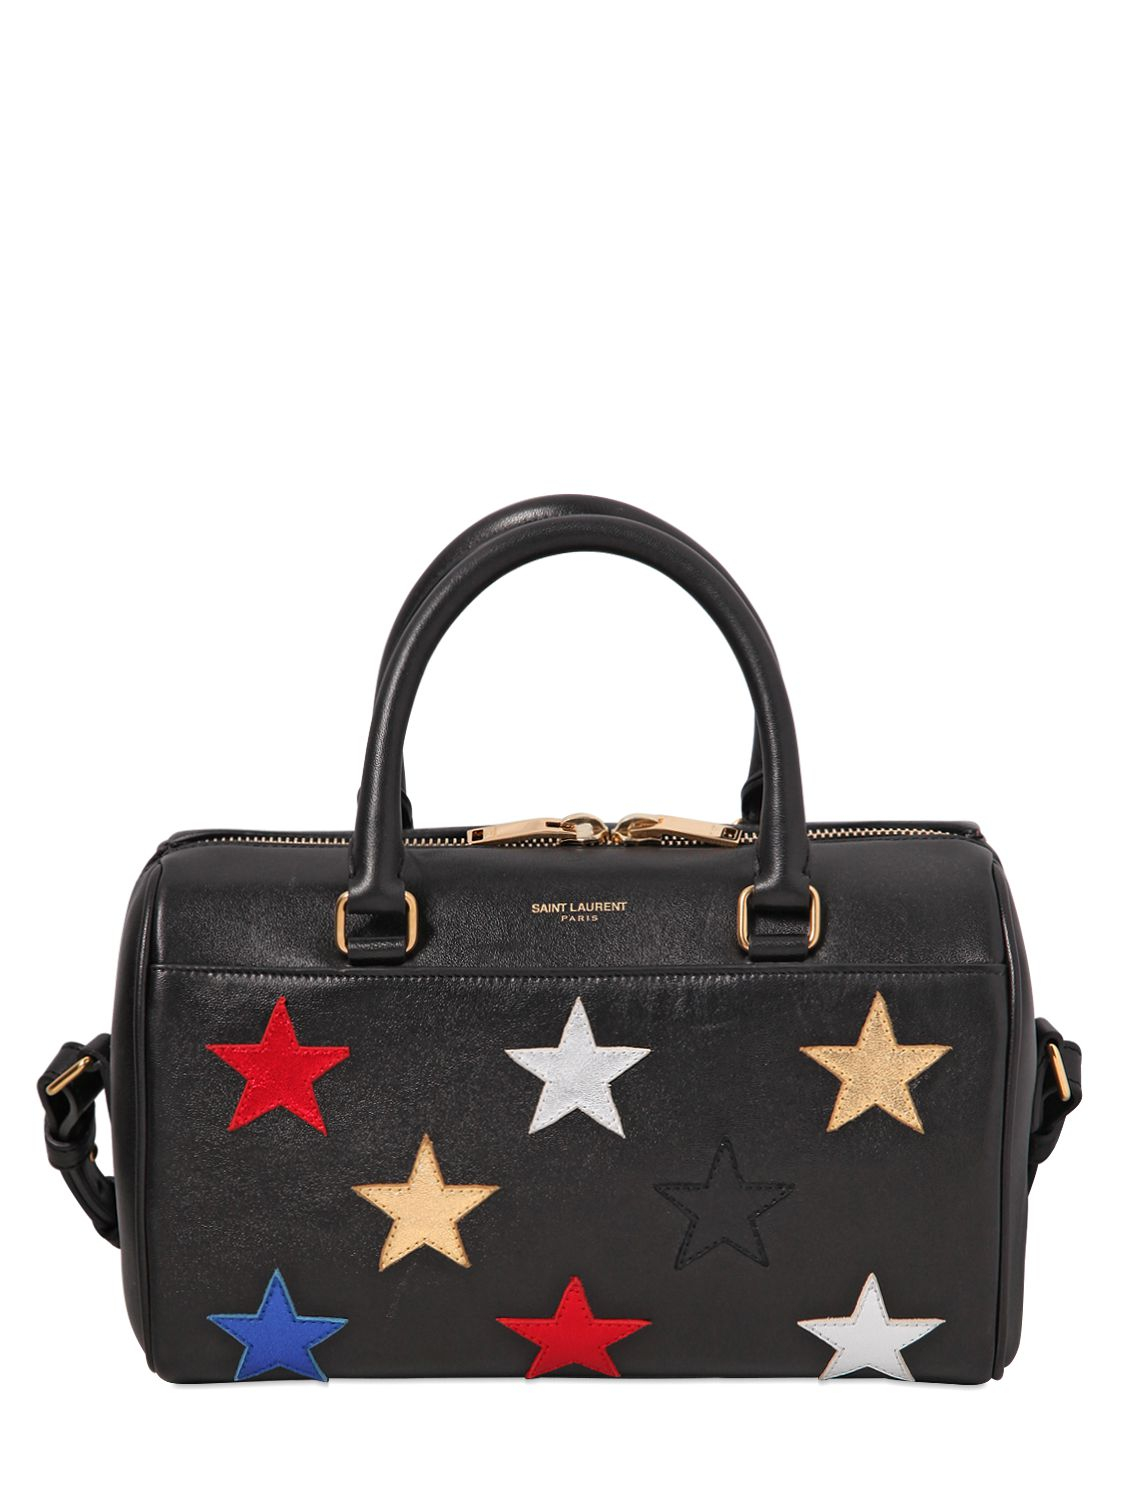 Saint laurent Baby Duffle Stars On Leather Bag in Black | Lyst